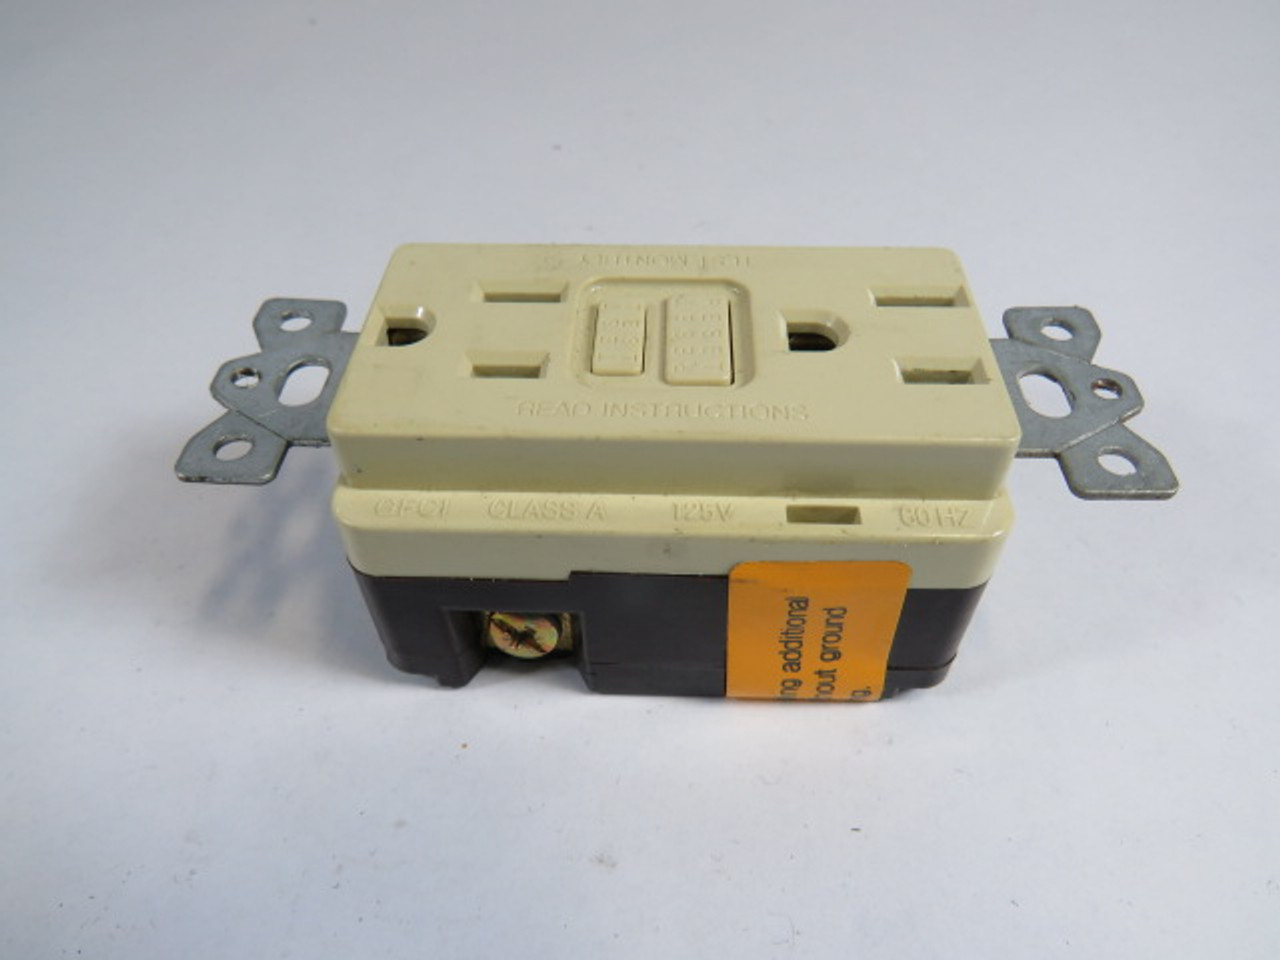 Bryant GF53IA Ivory Ground Fault Receptacle 20A 125V 60HZ USED